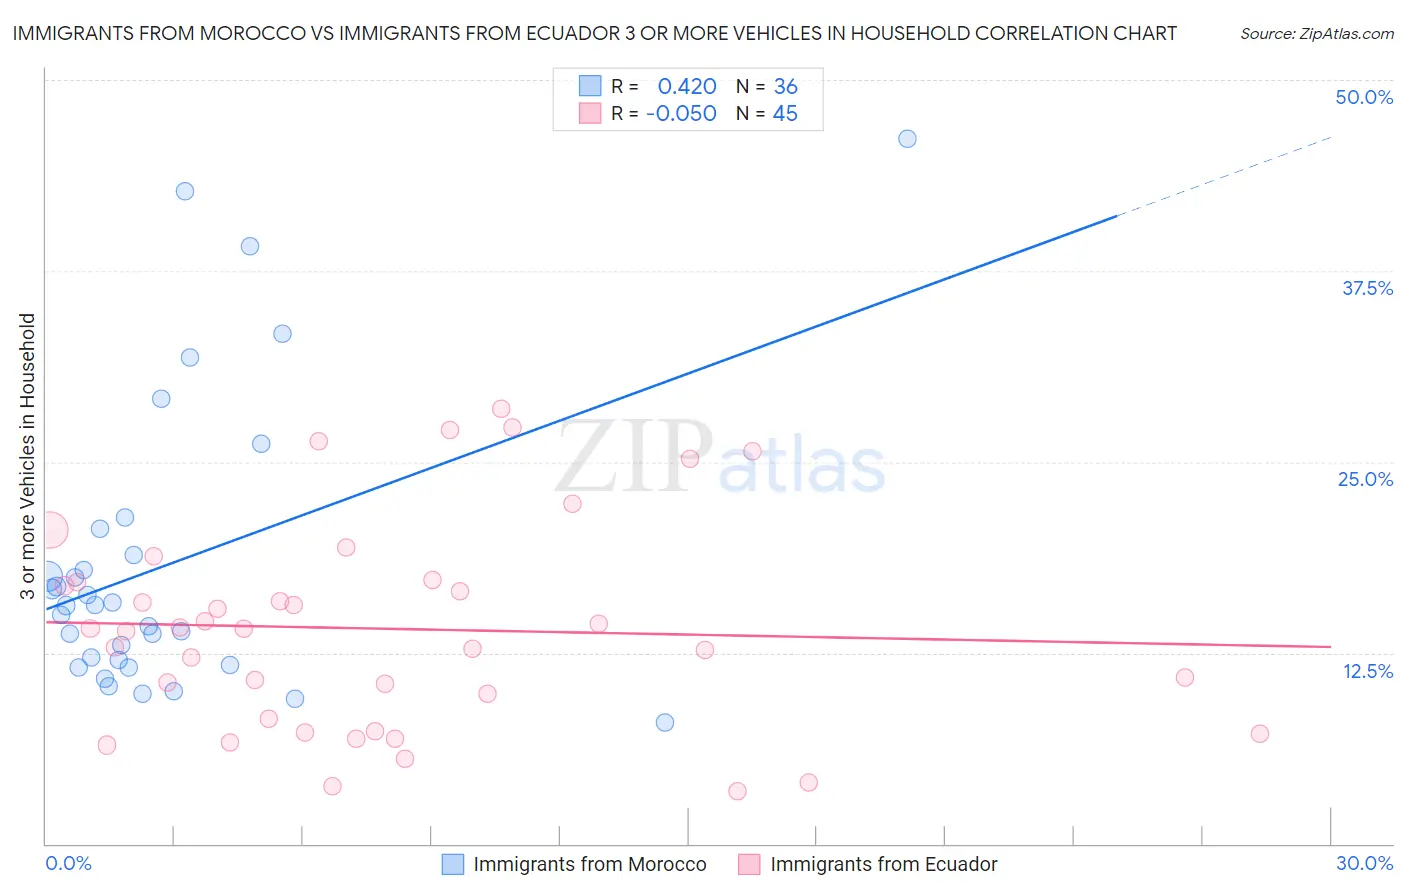 Immigrants from Morocco vs Immigrants from Ecuador 3 or more Vehicles in Household